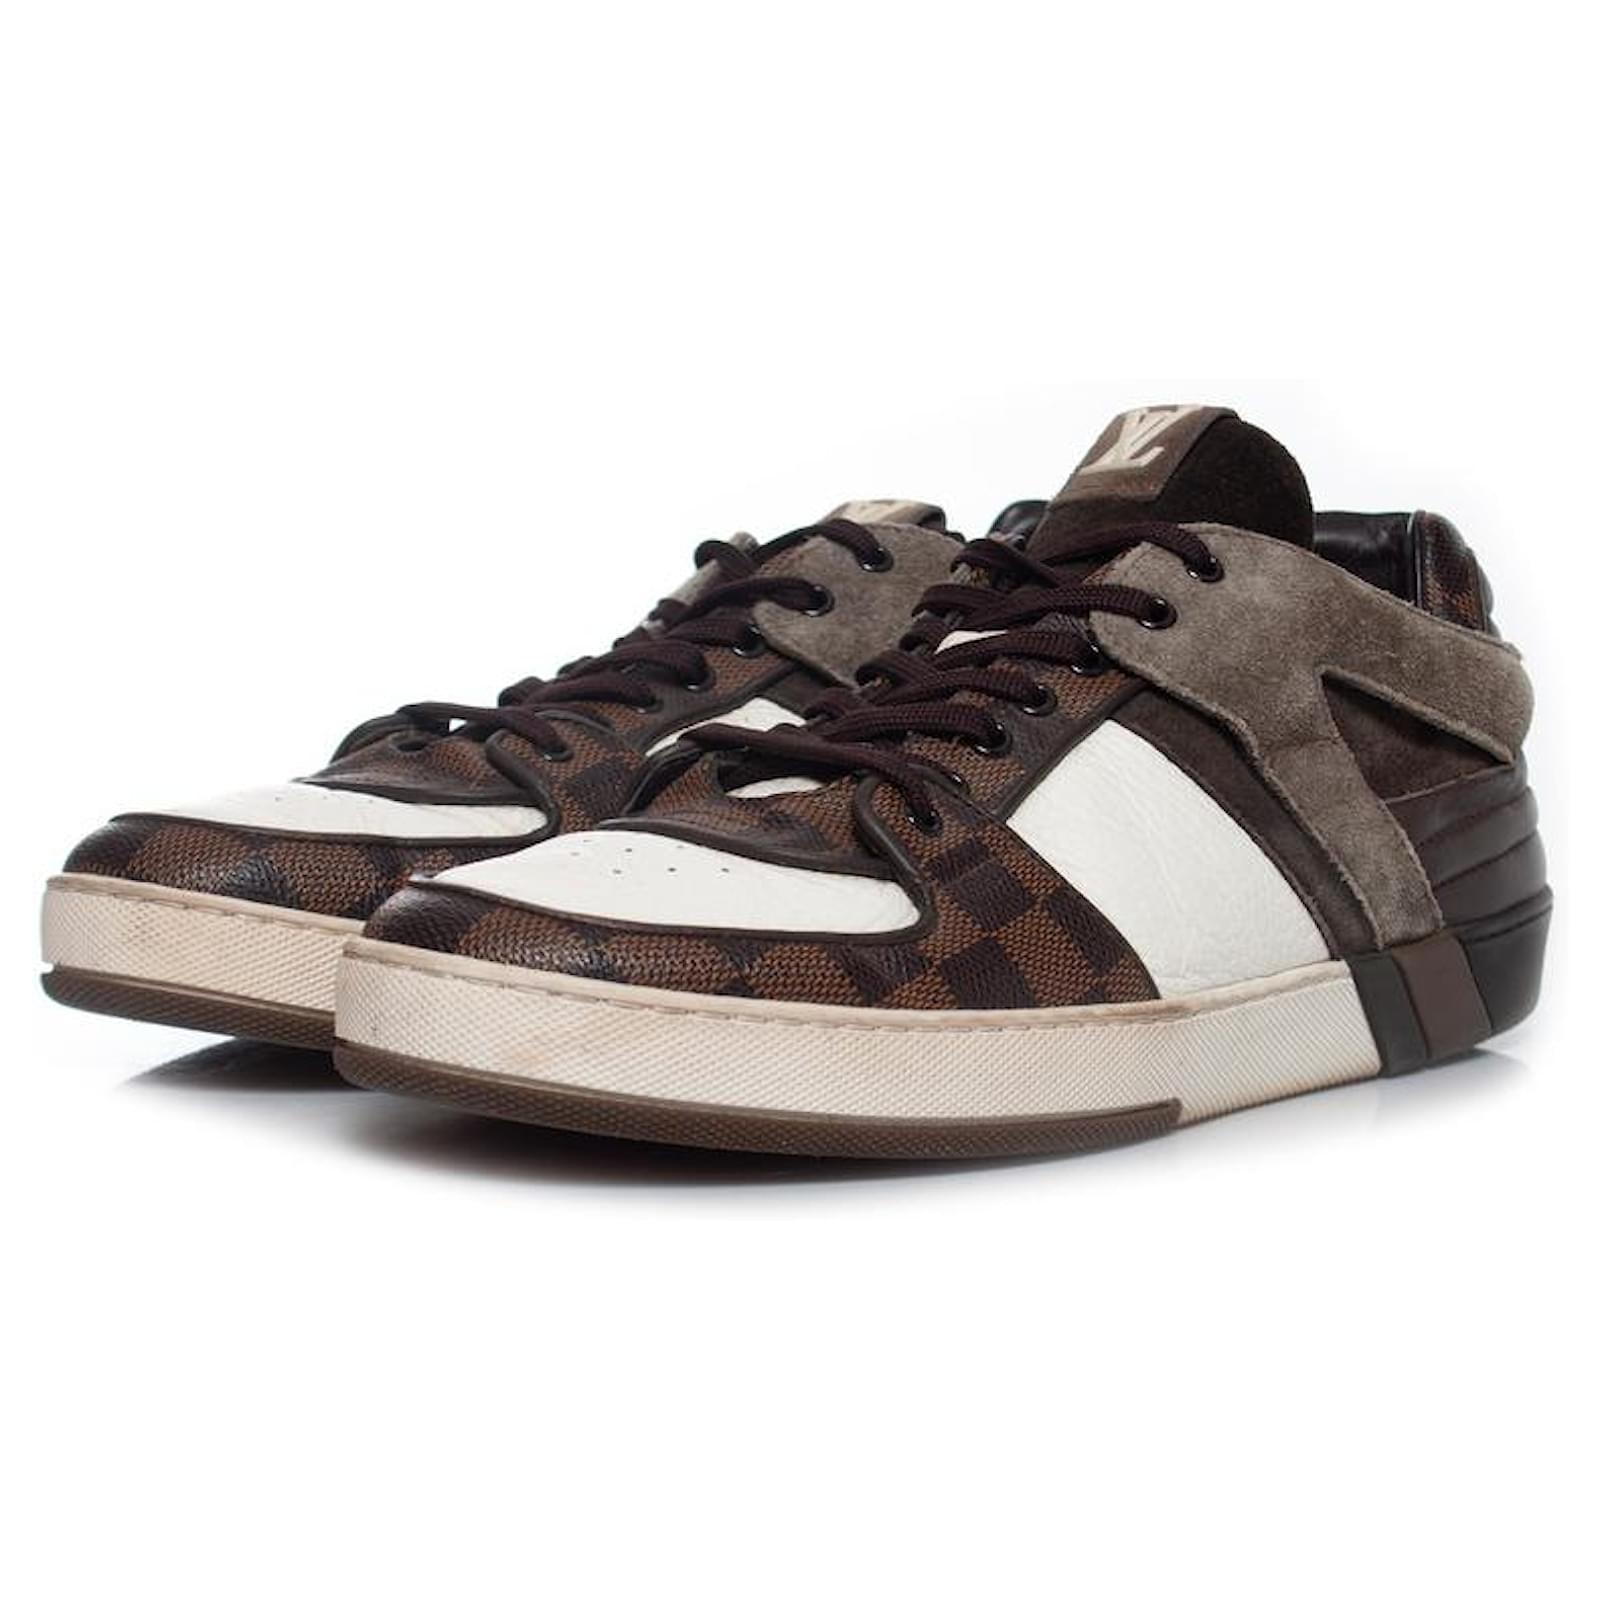 Luxembourg leather low trainers Louis Vuitton Brown size 43 EU in